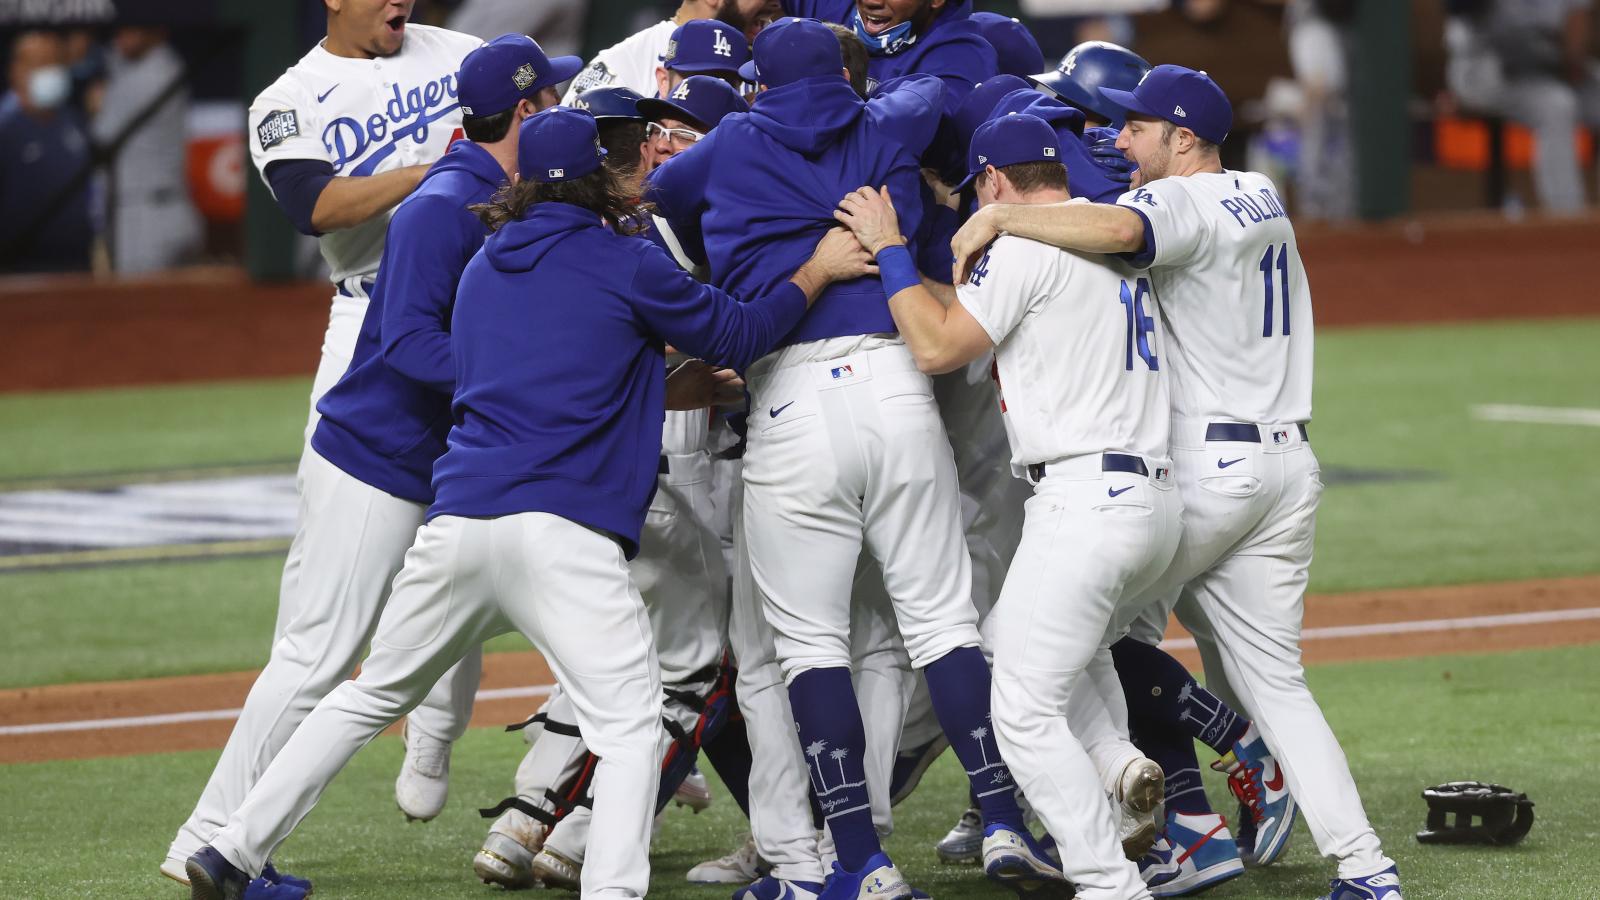 Los Angeles Dodgers win first World Series in 32 years with game 6 win